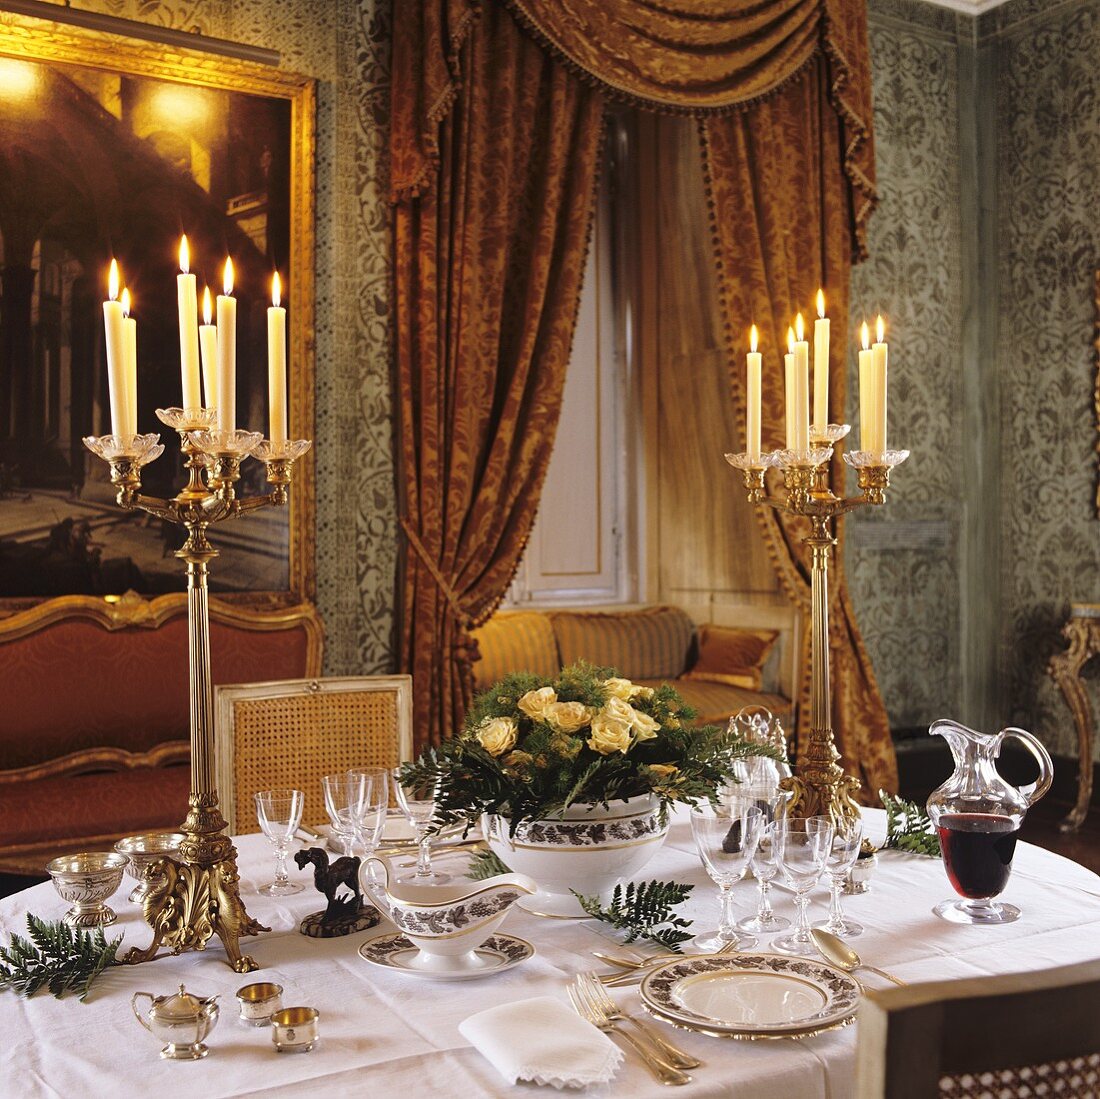 A romantic atmosphere in a palazzo - a festive table set for two